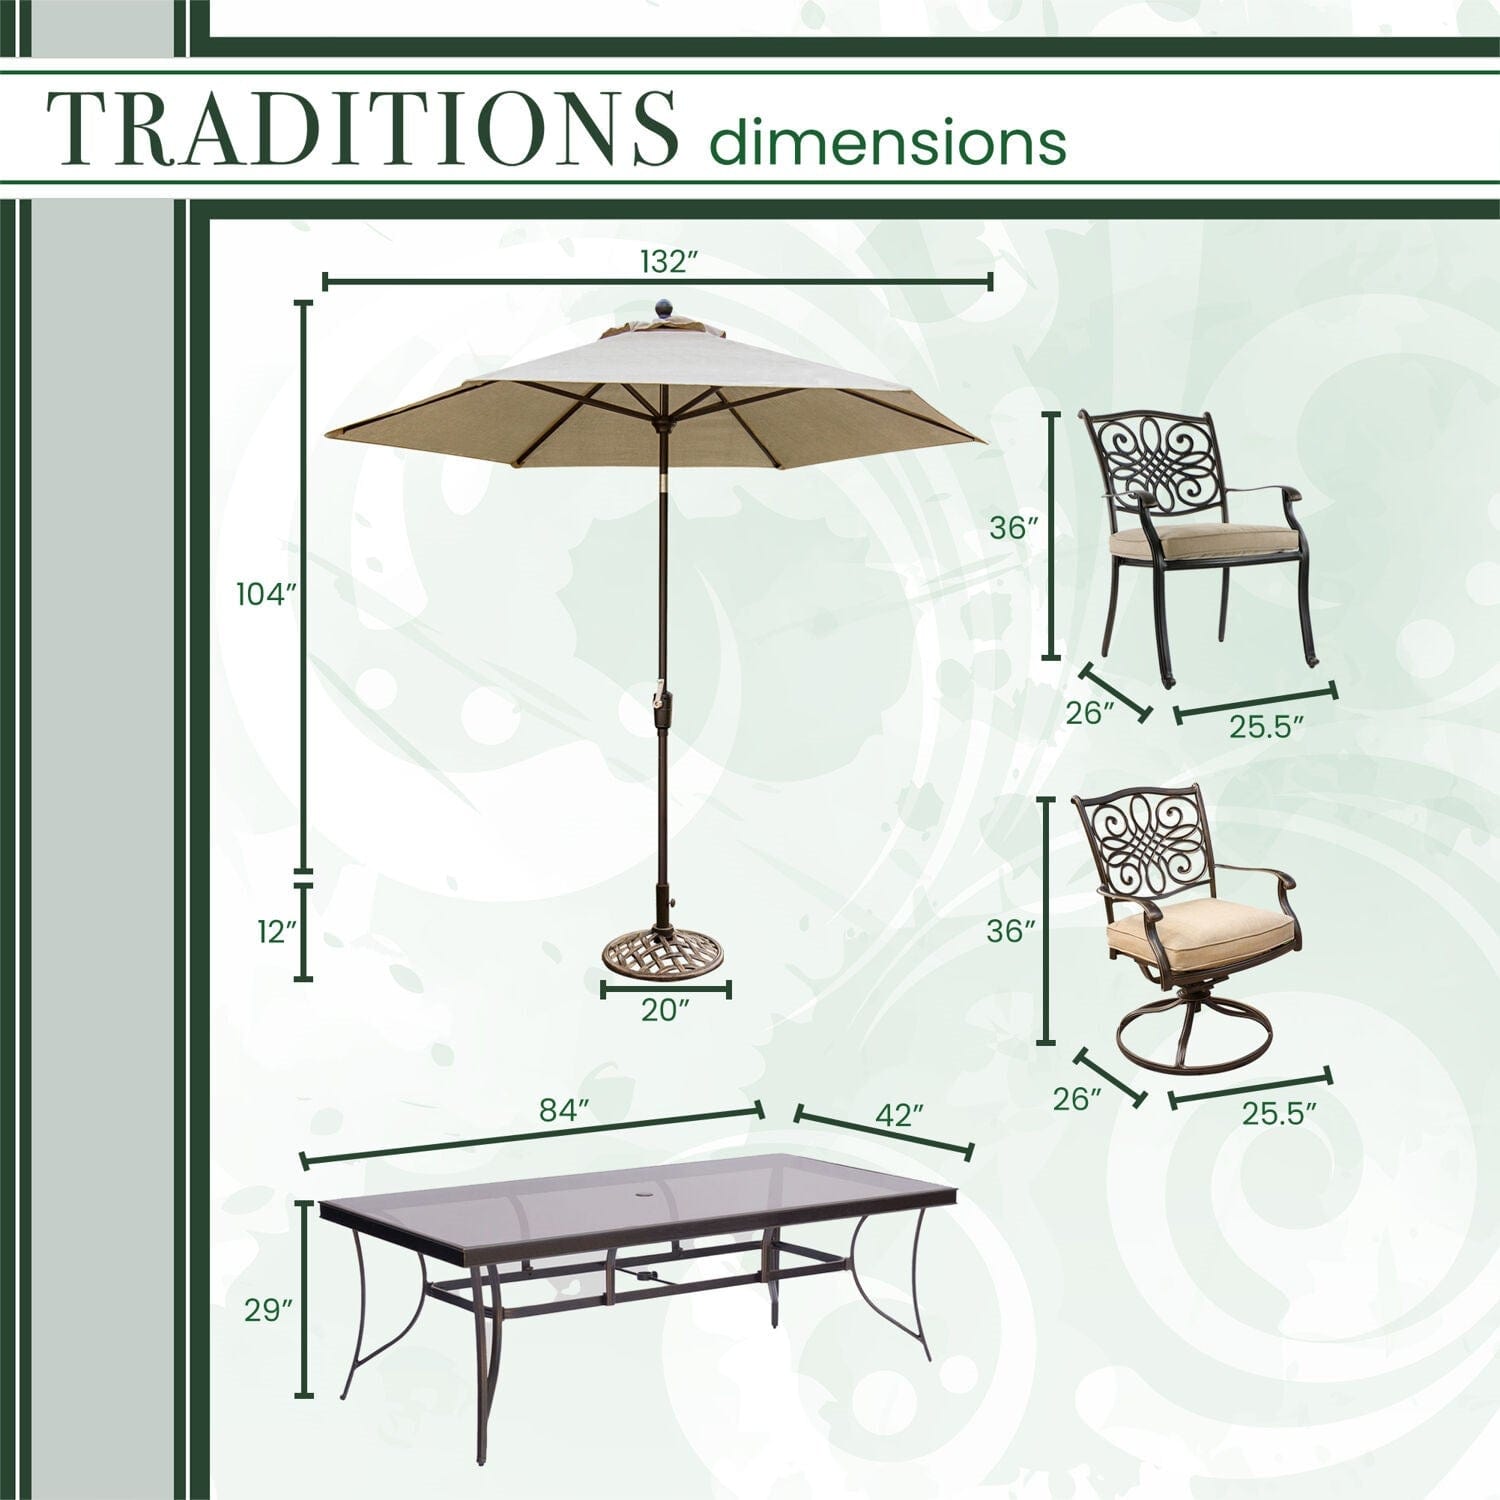 Hanover Outdoor Dining Set Hanover - Traditions 7-Piece Aluminium Frame Dining Set in Tan with Extra Large Glass-Top Dining Table, 11 Ft. Table Umbrella, and Umbrella Stand | TRADDN7PCSW2G-SU